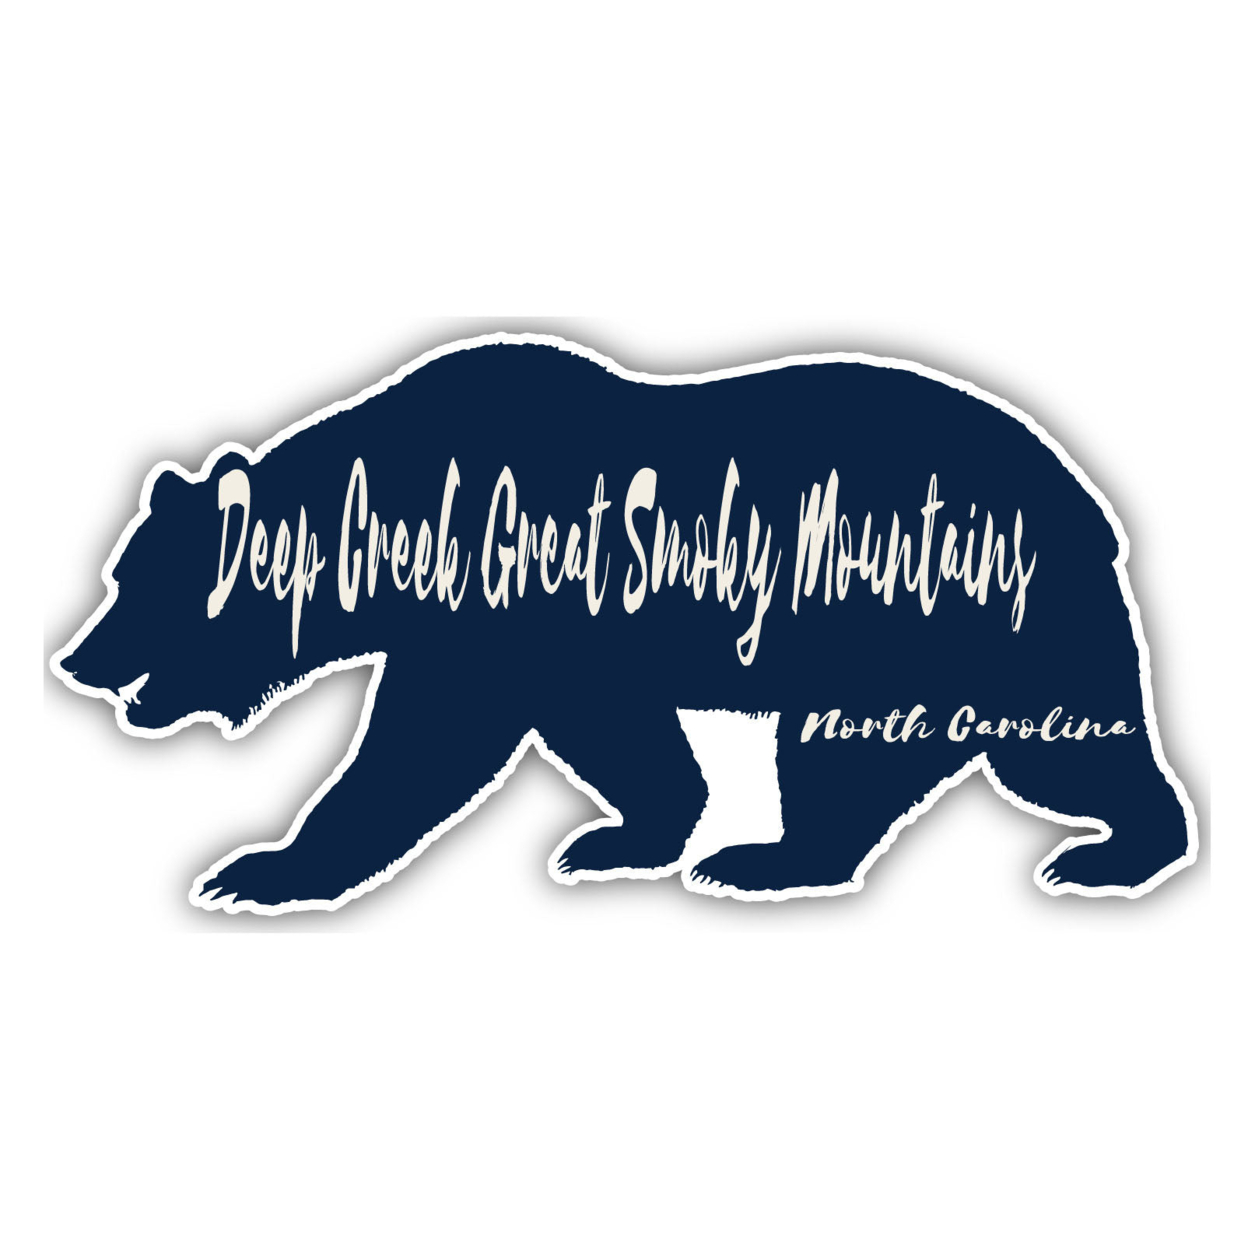 Deep Creek Great Smoky Mountains North Carolina Souvenir Decorative Stickers (Choose Theme And Size) - 4-Pack, 6-Inch, Bear